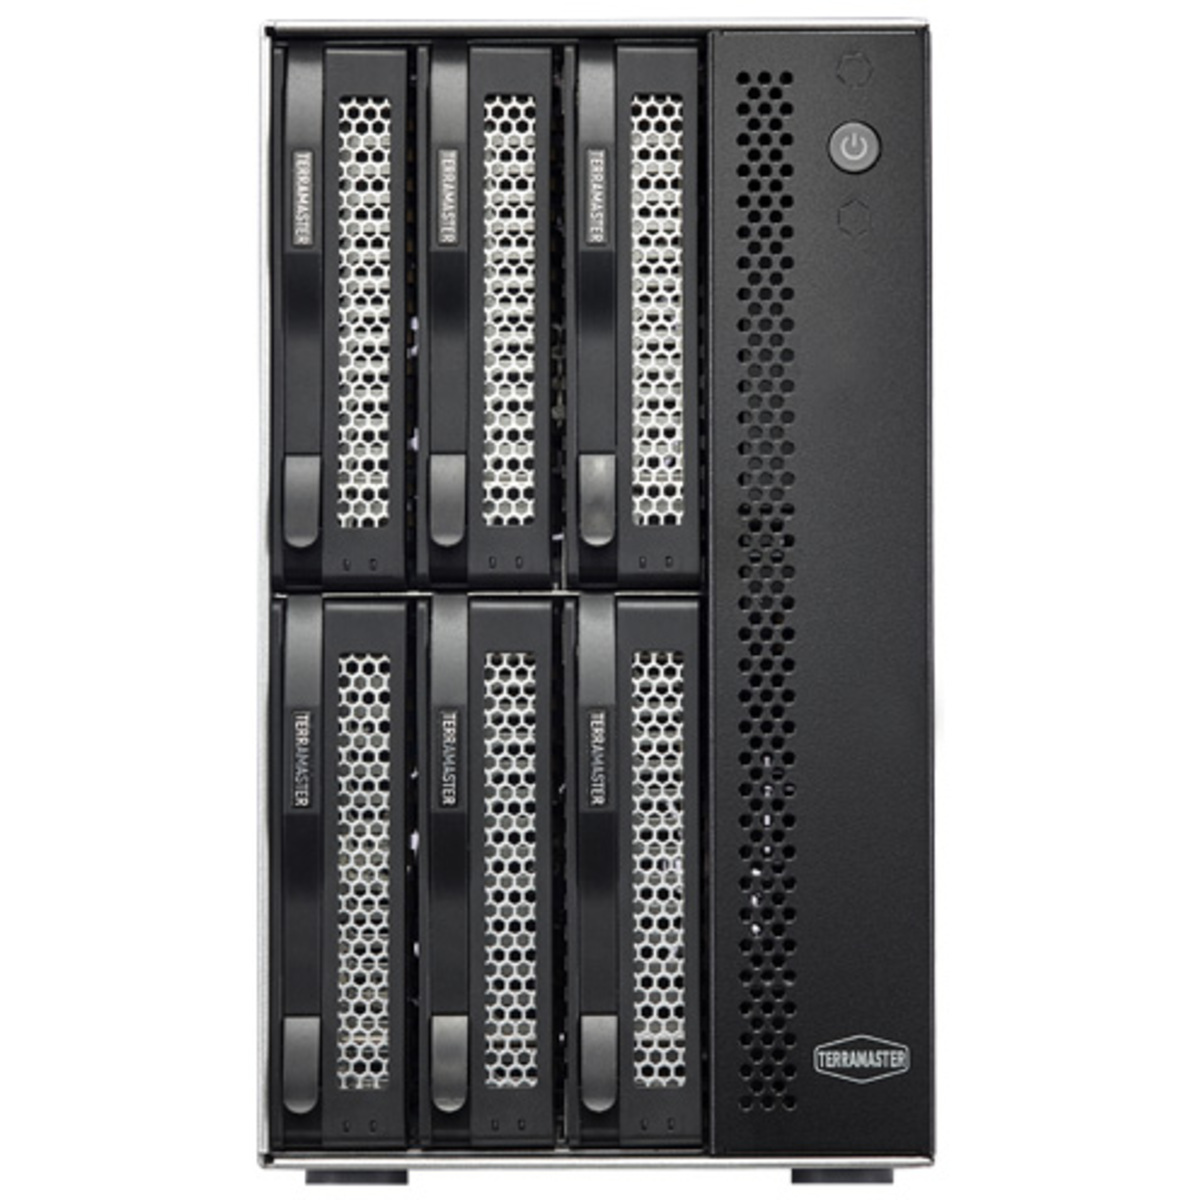 TerraMaster D6-320 32tb 6-Bay Desktop Multimedia / Power User / Business DAS - Direct Attached Storage Device 4x8tb Seagate IronWolf ST8000VN004 3.5 7200rpm SATA 6Gb/s HDD NAS Class Drives Installed - Burn-In Tested D6-320